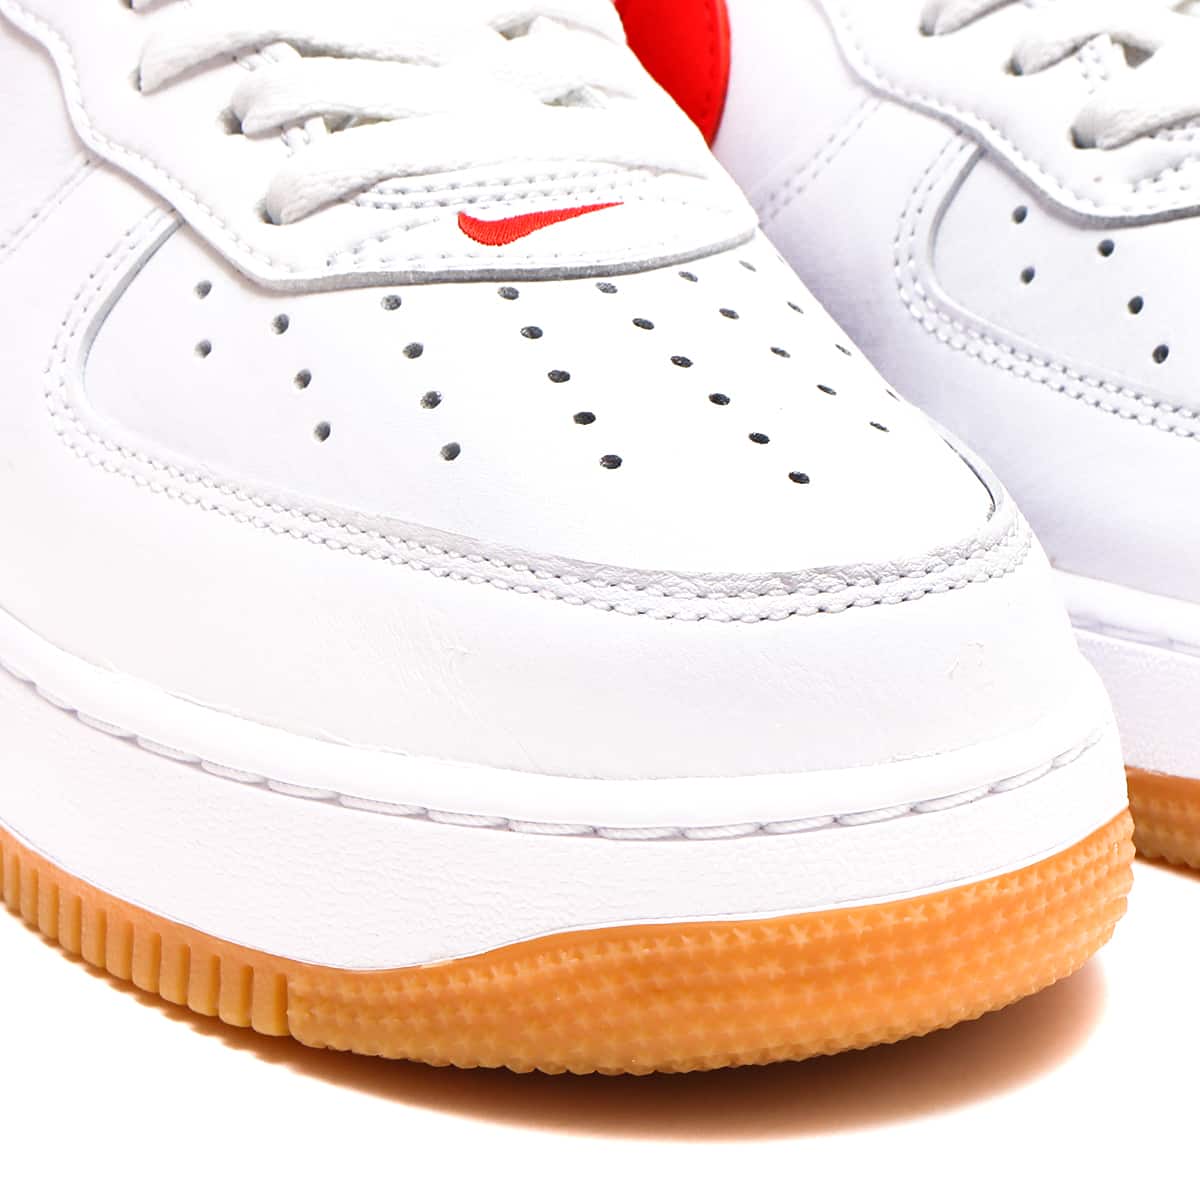 NIKE AIR FORCE 1 LOW RETRO WHITE/UNIVERSITY RED-GUM YELLOW 22SP-I